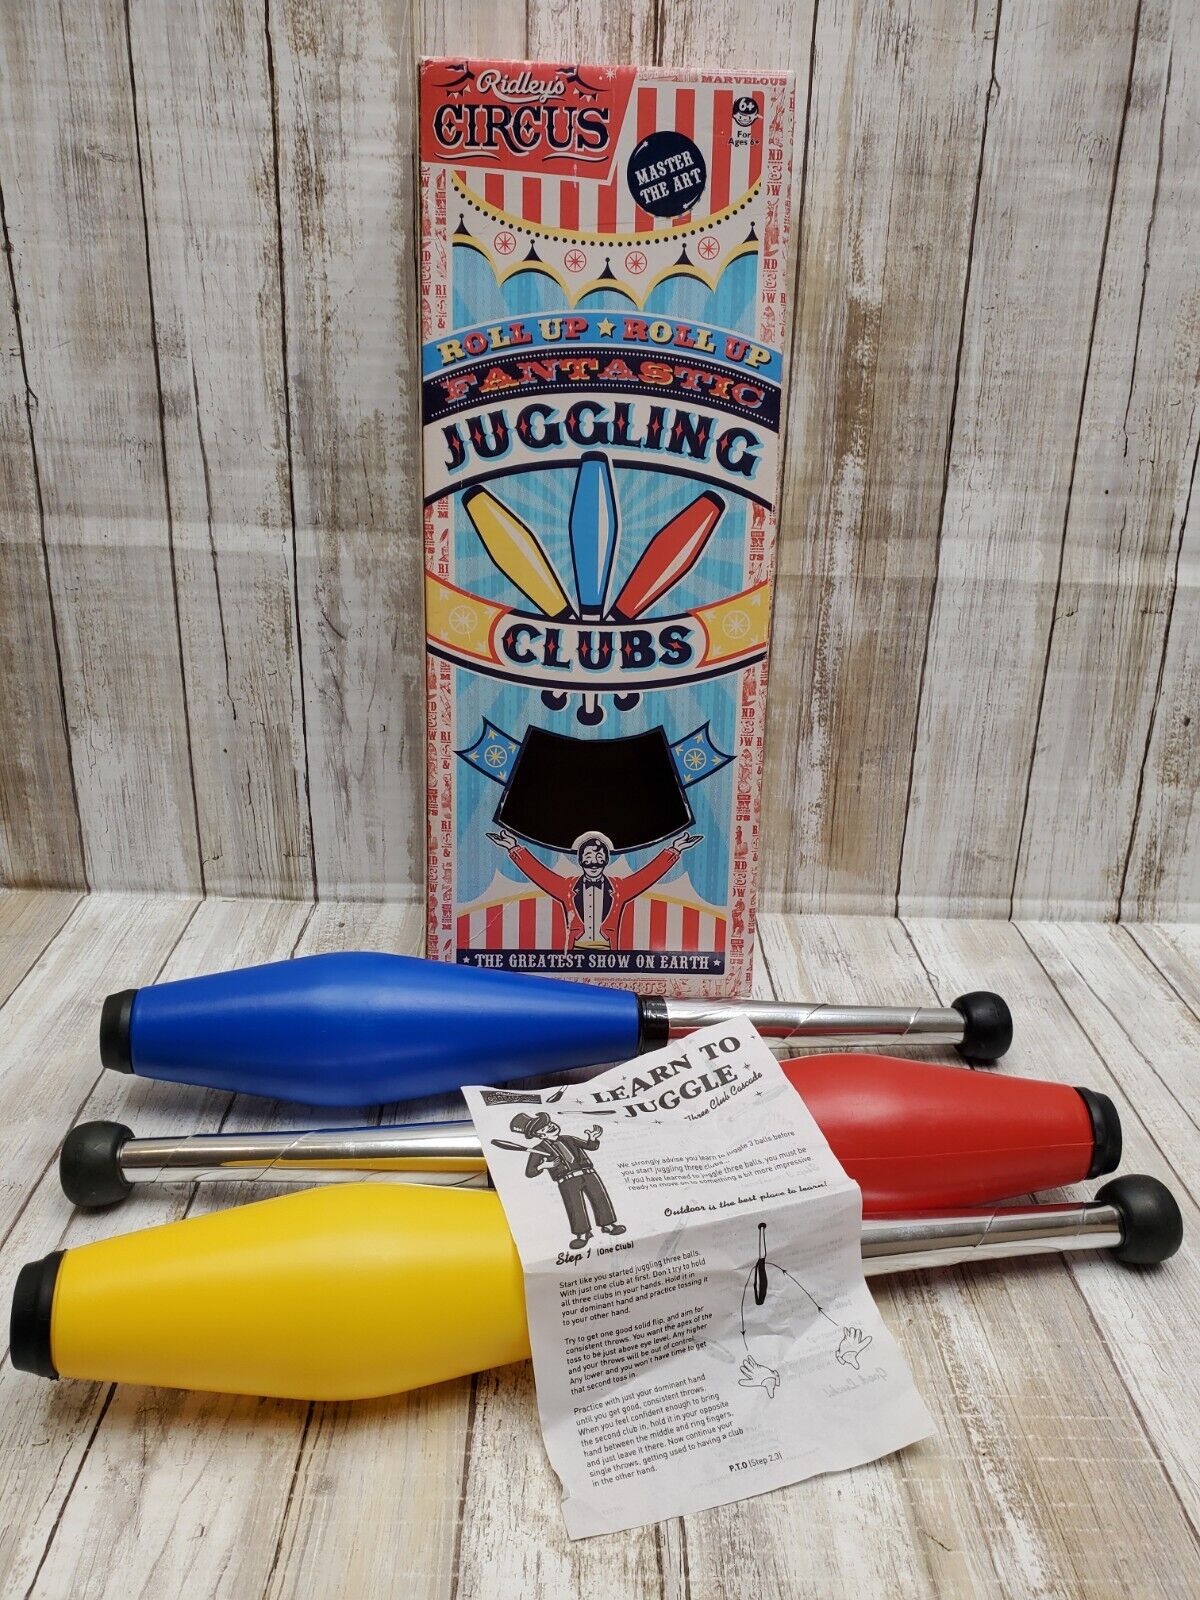 Ridleys Circus Roll Up Fantastic Juggling Clubs With Instructions Wild & Wolf